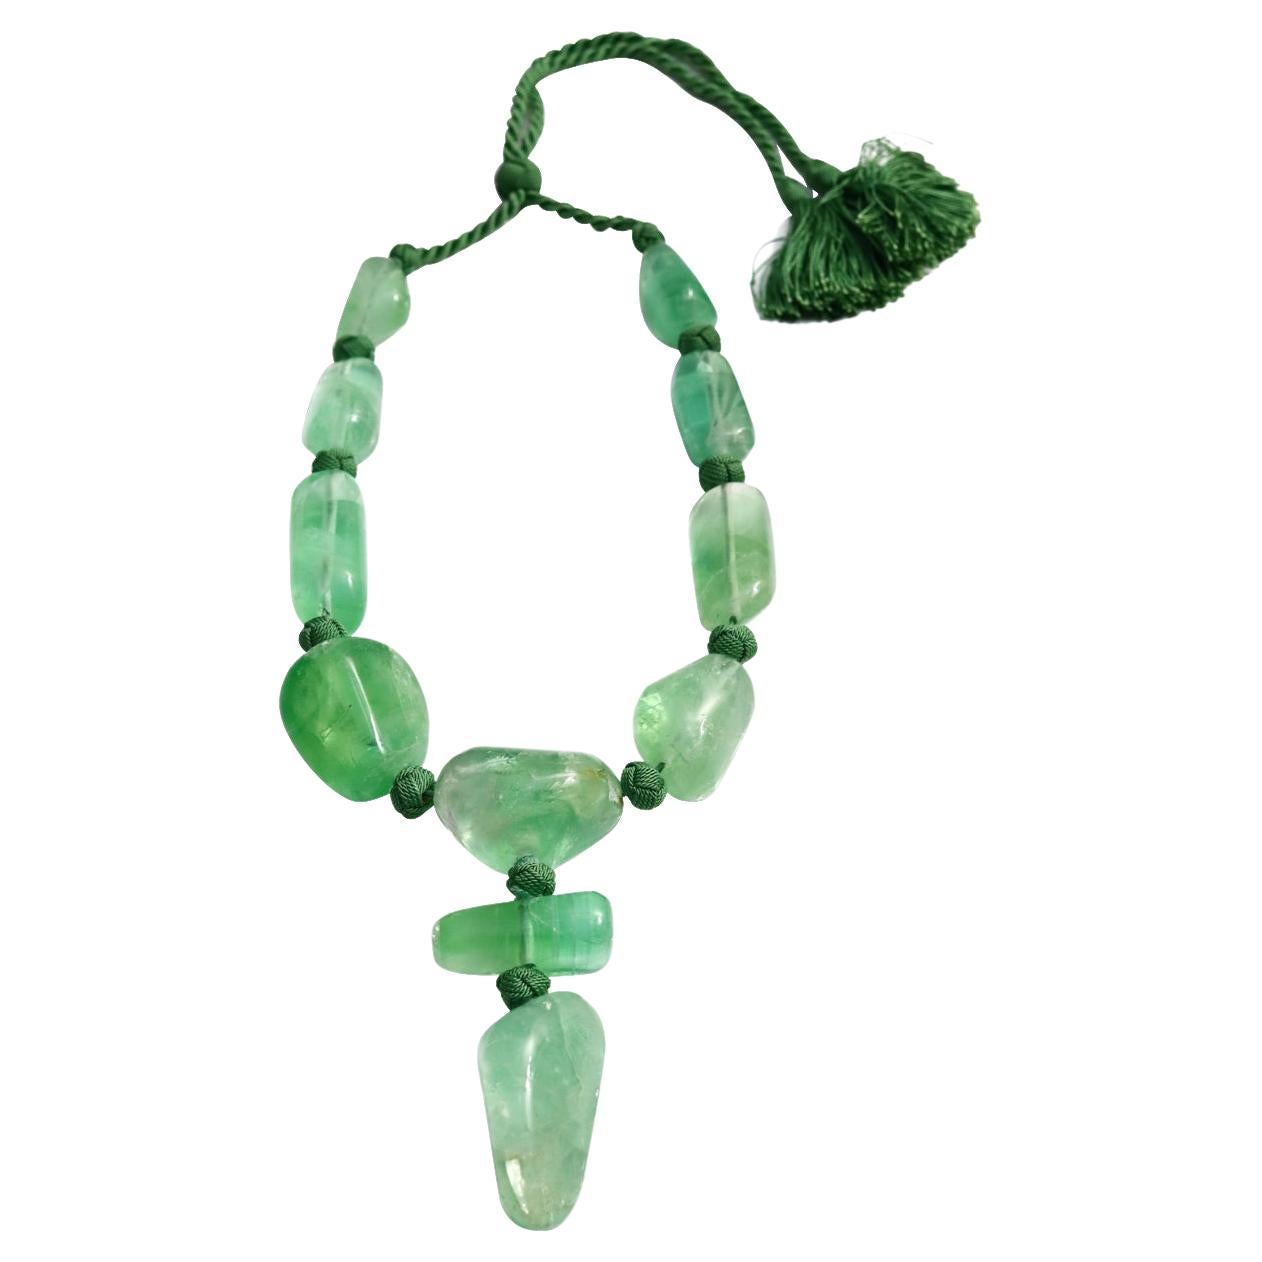 Vintage Monies Green Polished Quartz on Silk Knotted Cord Necklace Circa 2000s